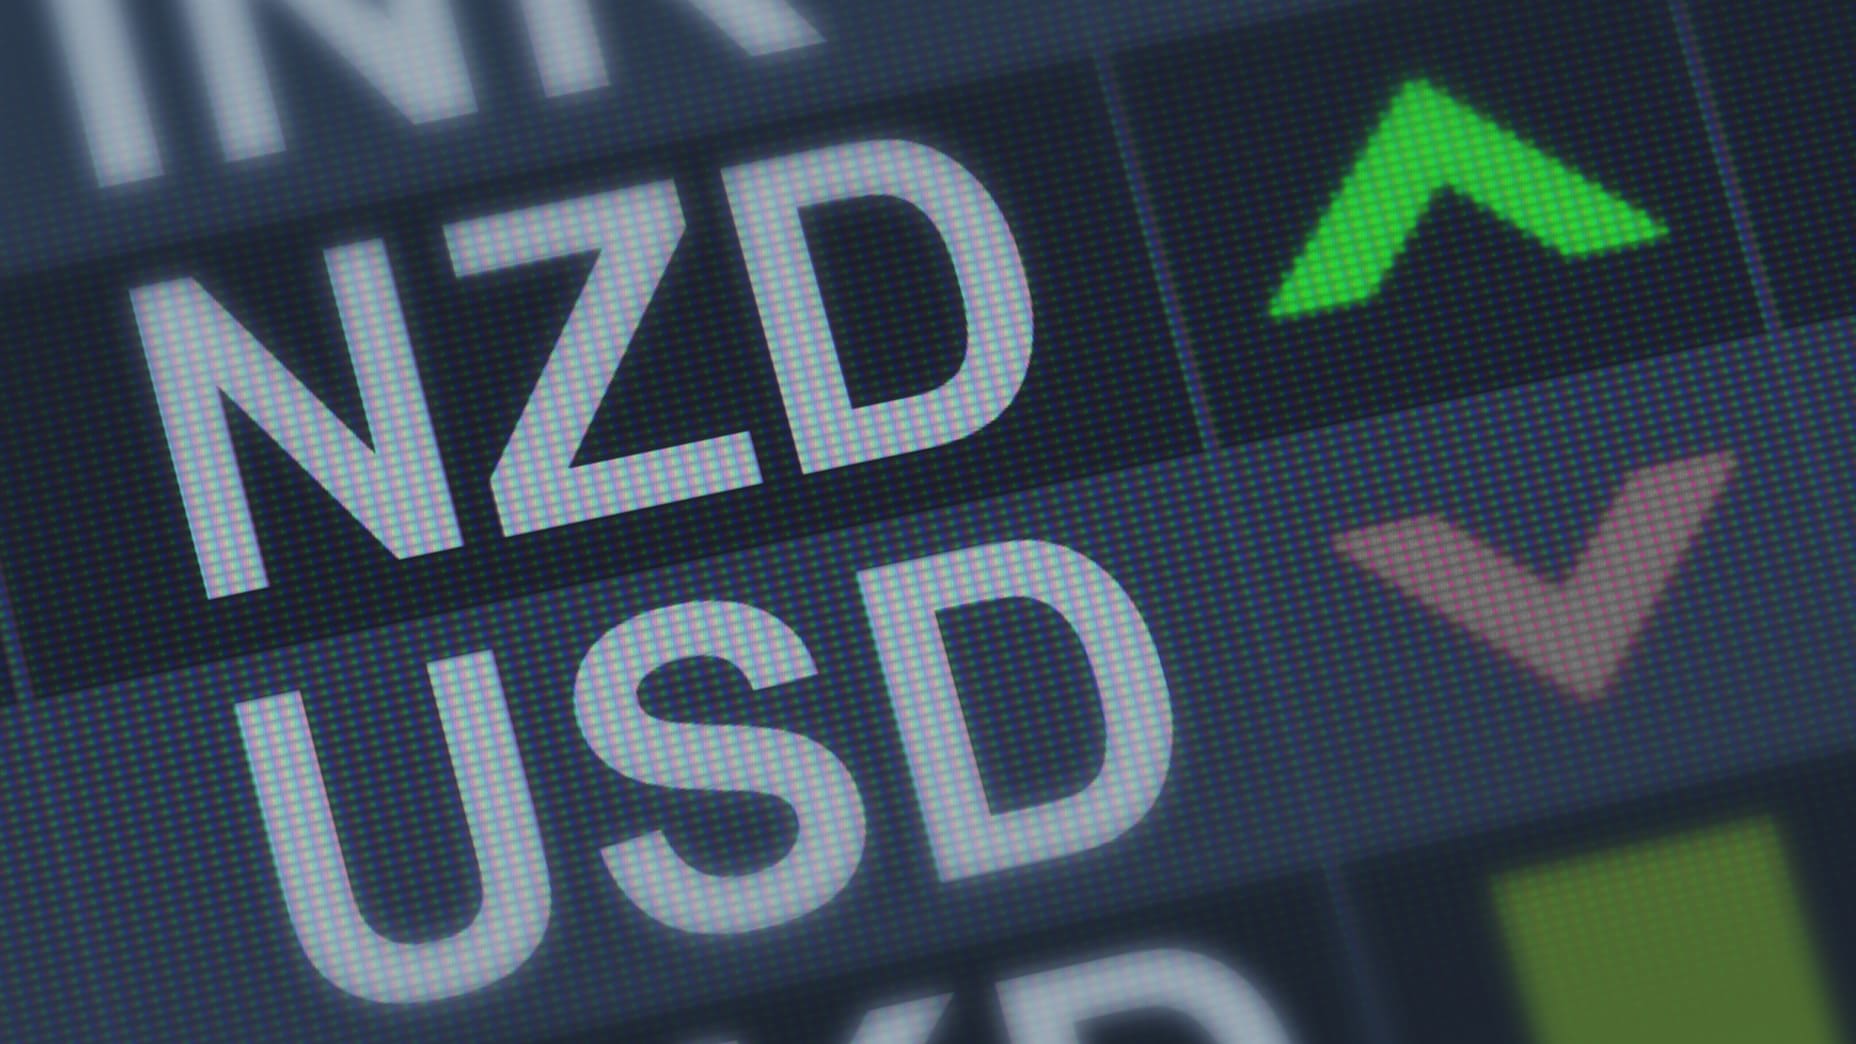 NZD/USD Forecast: Will the Decline Continue in 2023?